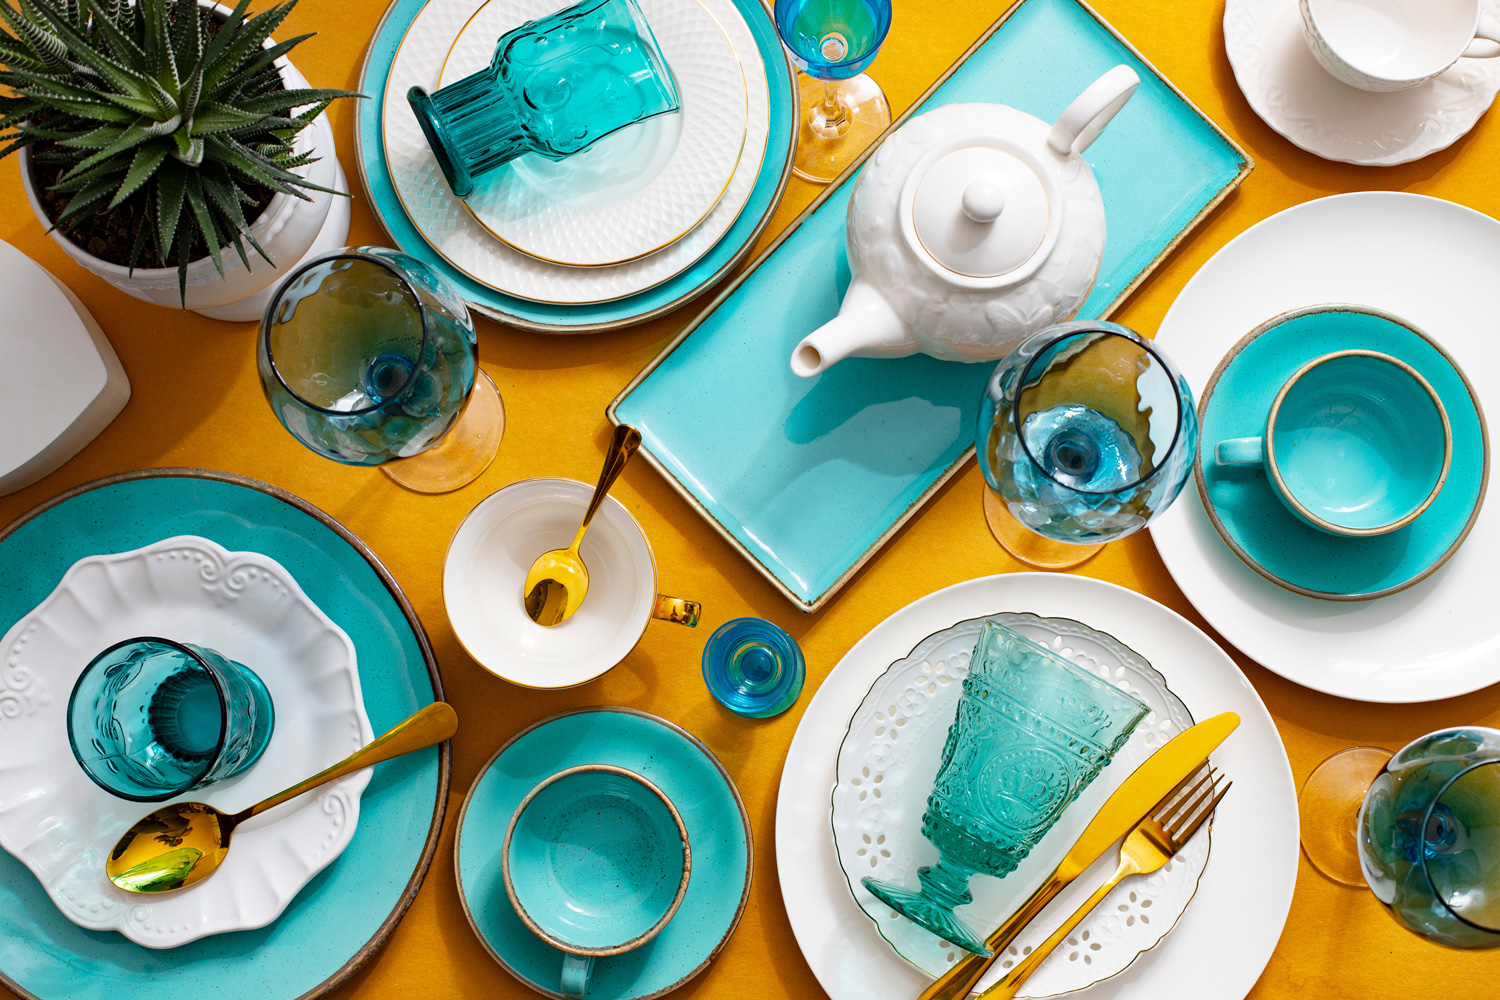 Beautiful table setting with colourful blue green dishes, cups, glasses and other dishnware on a mustard yellow background